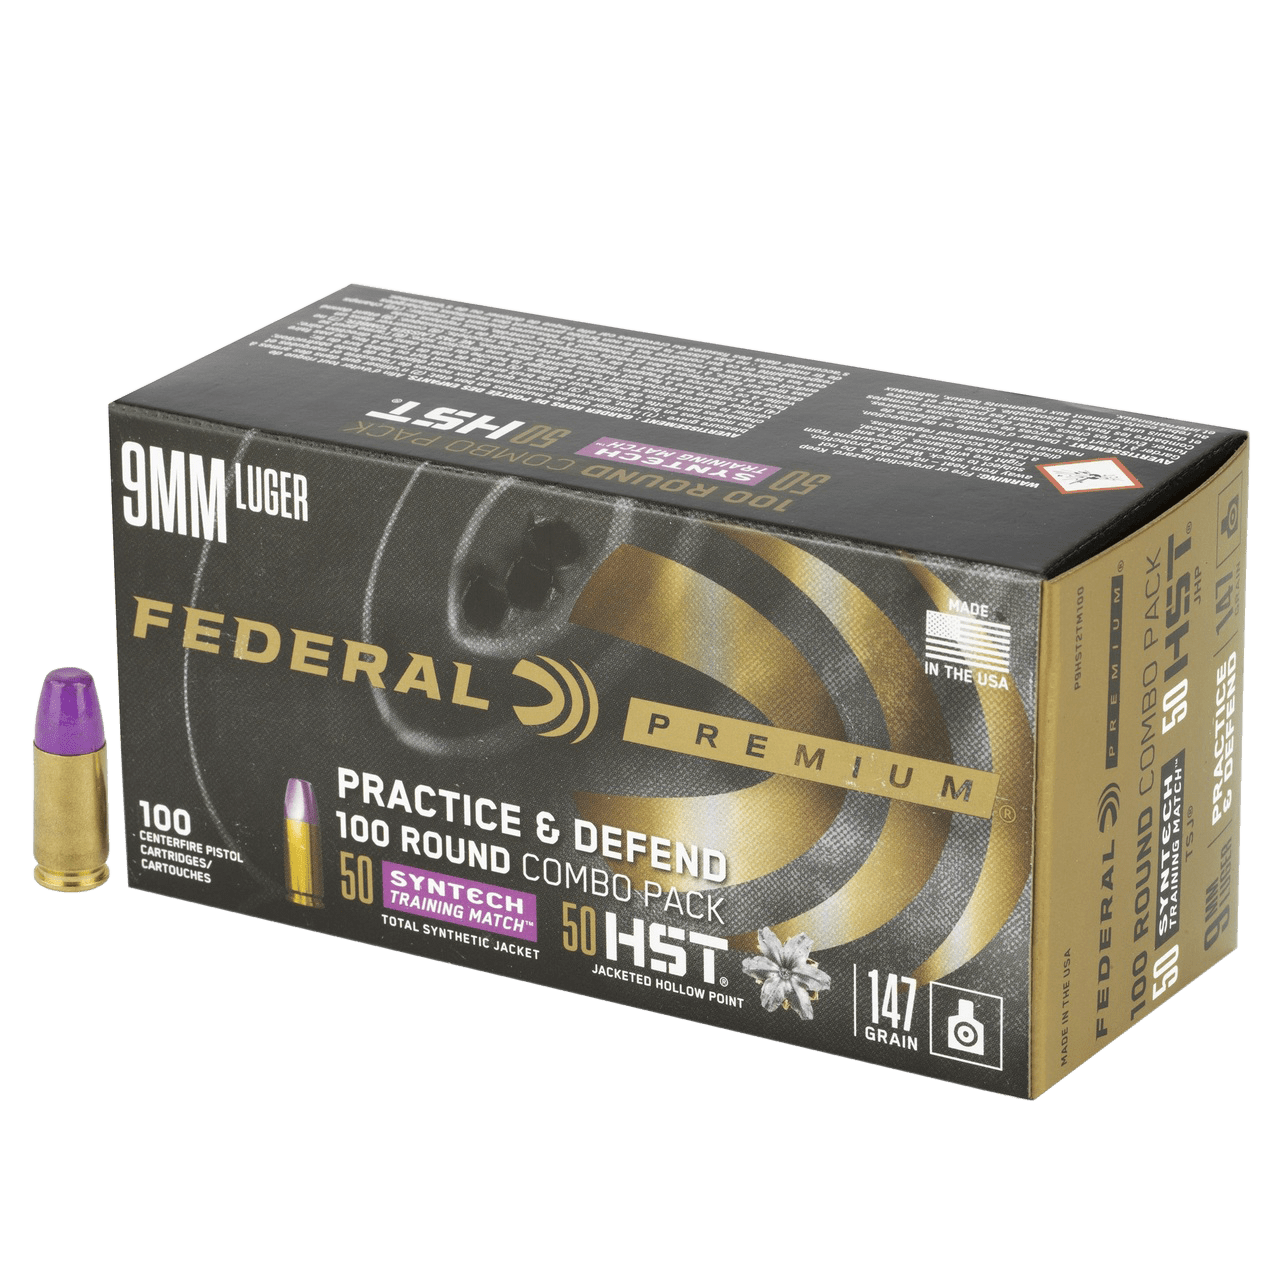 Federal Federal Practice & Defend Pistol Ammo 9mm 147 Gr. Hst/synthetic 100 Rd. Ammo